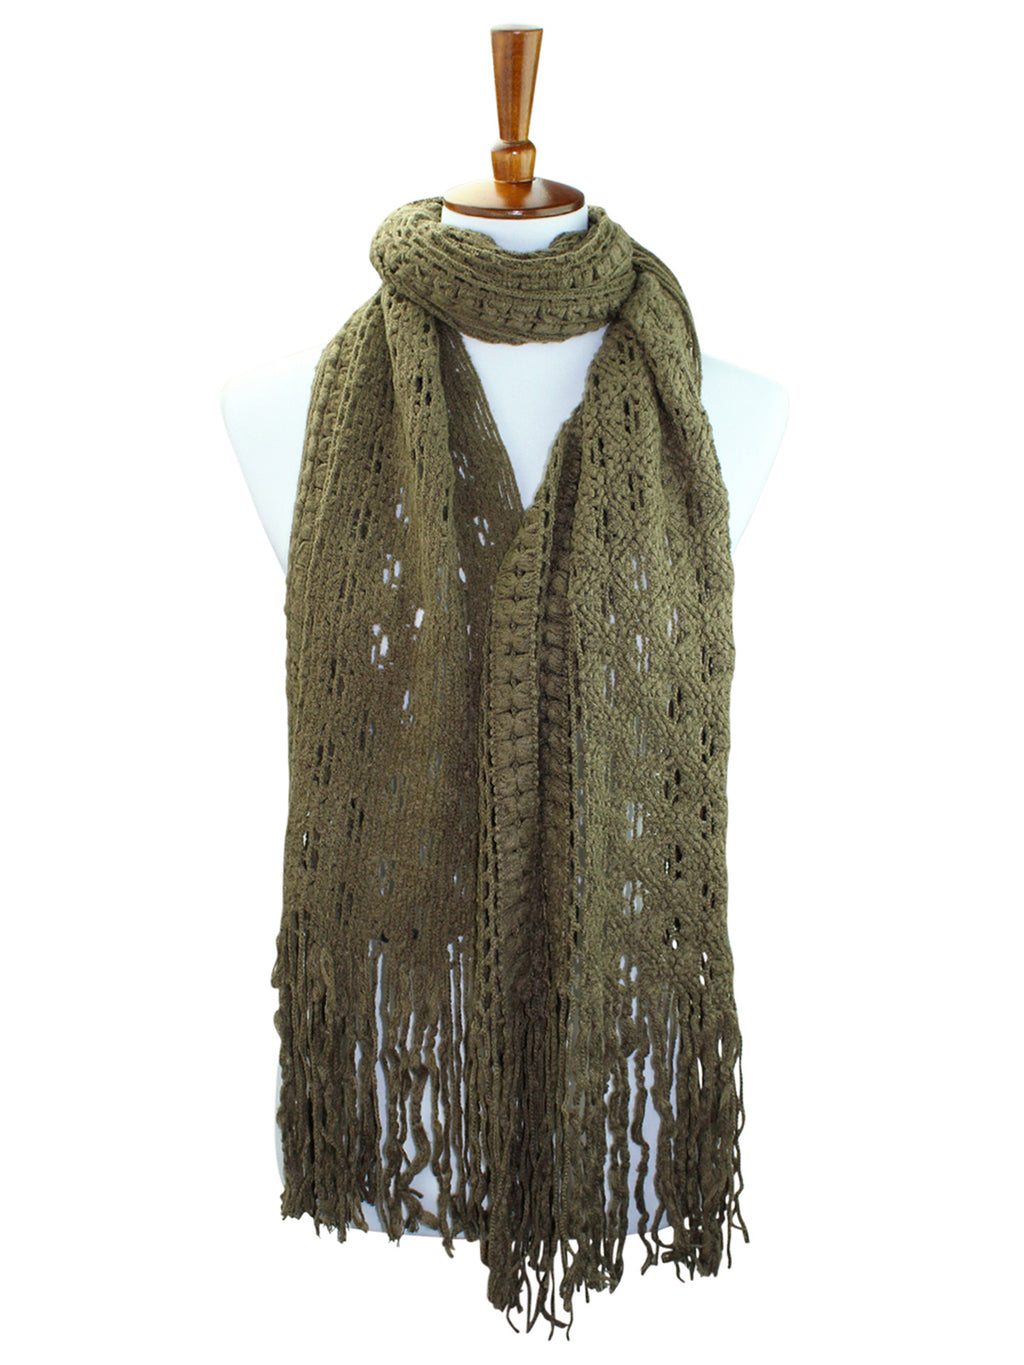 Taupe Long Crochet Knit Winter Infinity Scarf